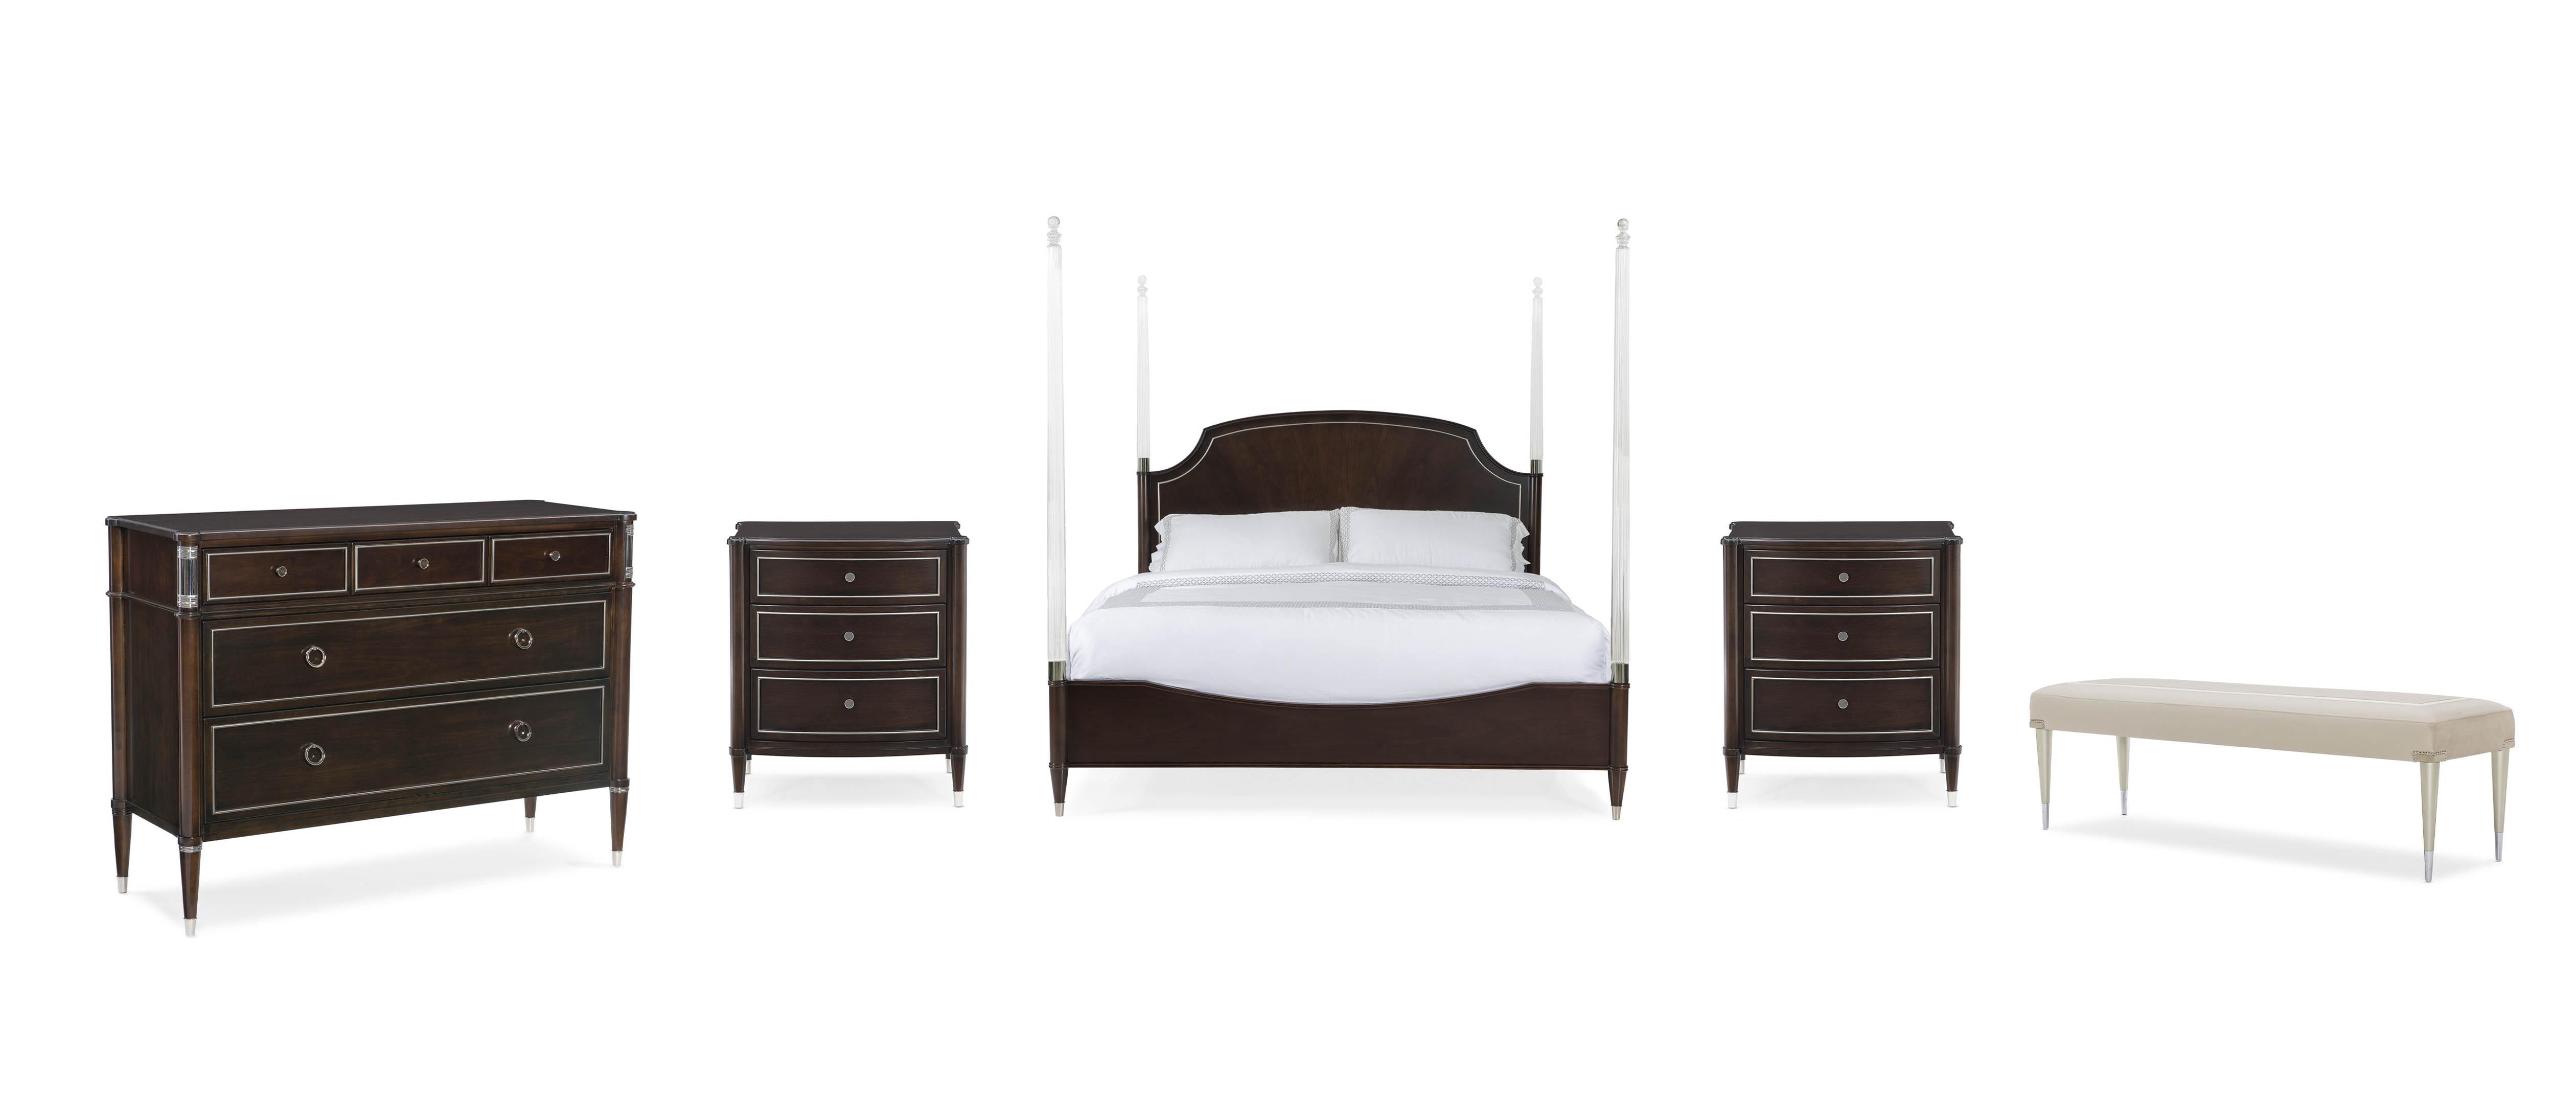 Contemporary Poster Bedroom Set SUITE DREAMS W/POST / SUITE YOURSELF / SUITE MATE / BOARDING ON BEAUTIFUL CLA-420-106-Set-5 in Dark Walnut 